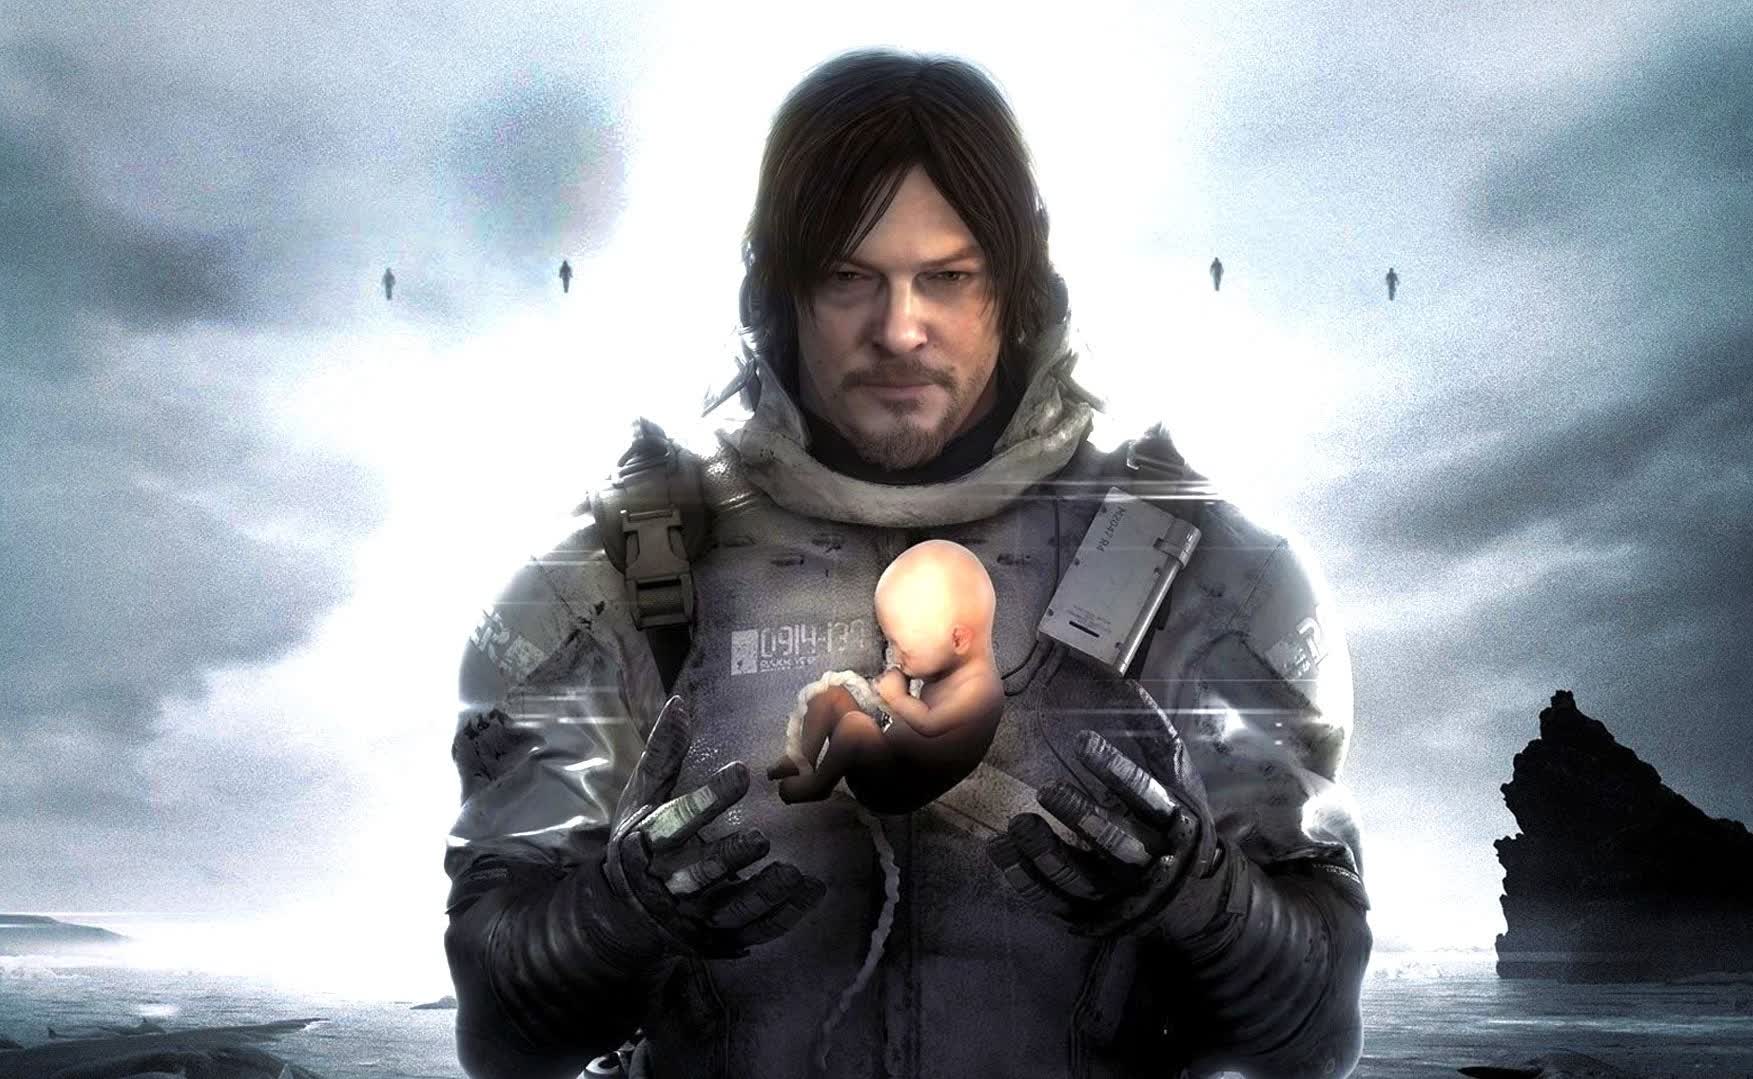 You can grab Death Stranding free from the Epic Games Store for the next few hours